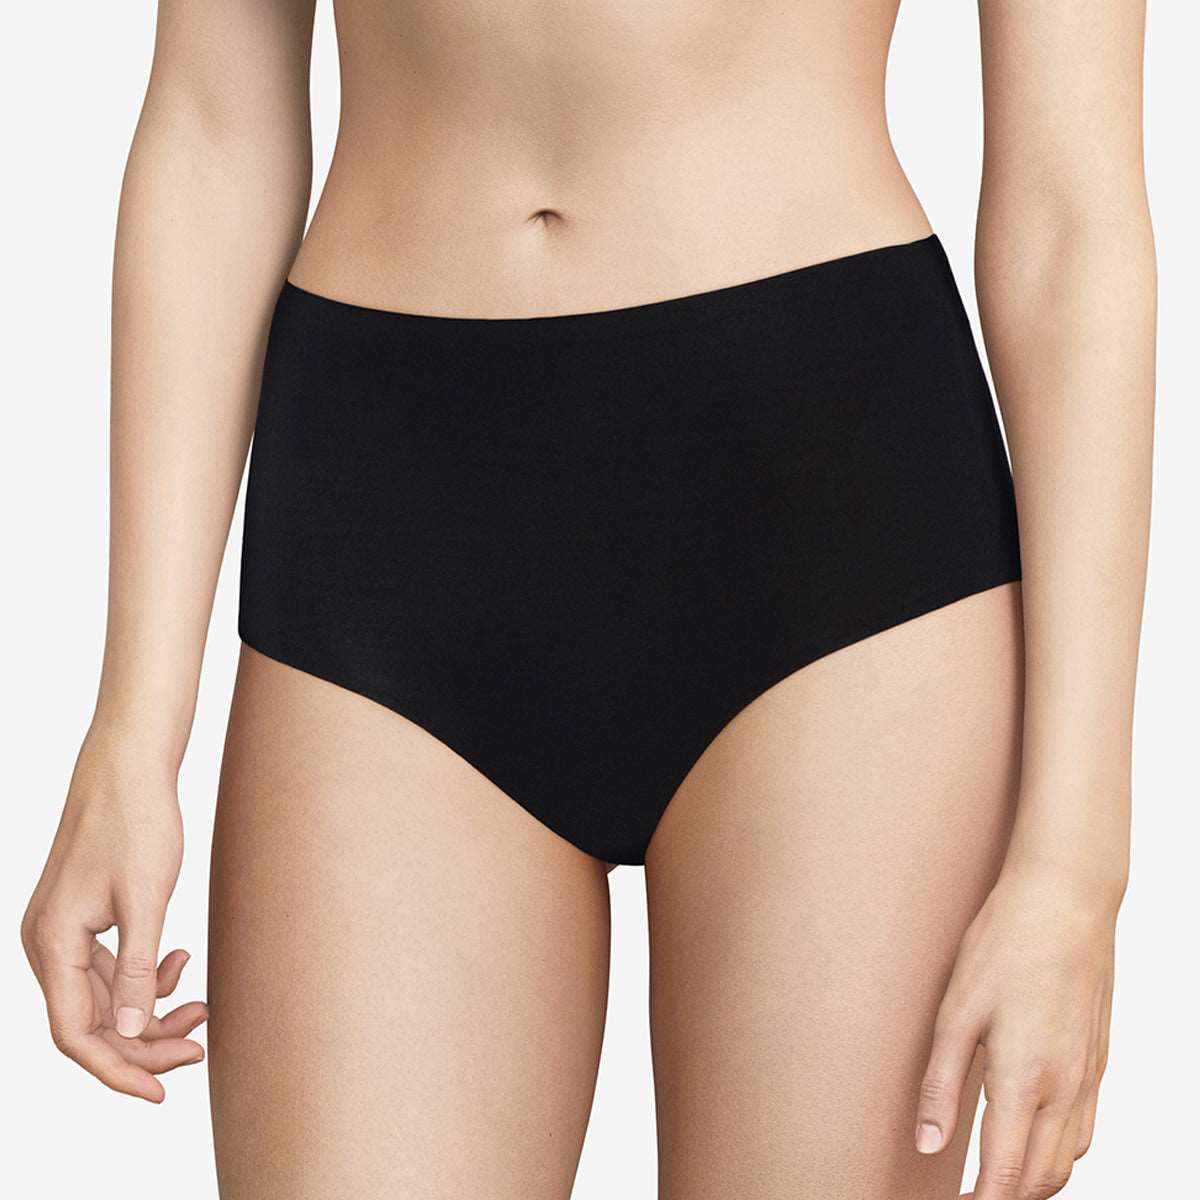 Stretchy and Cozy High Waisted Seamless Panty